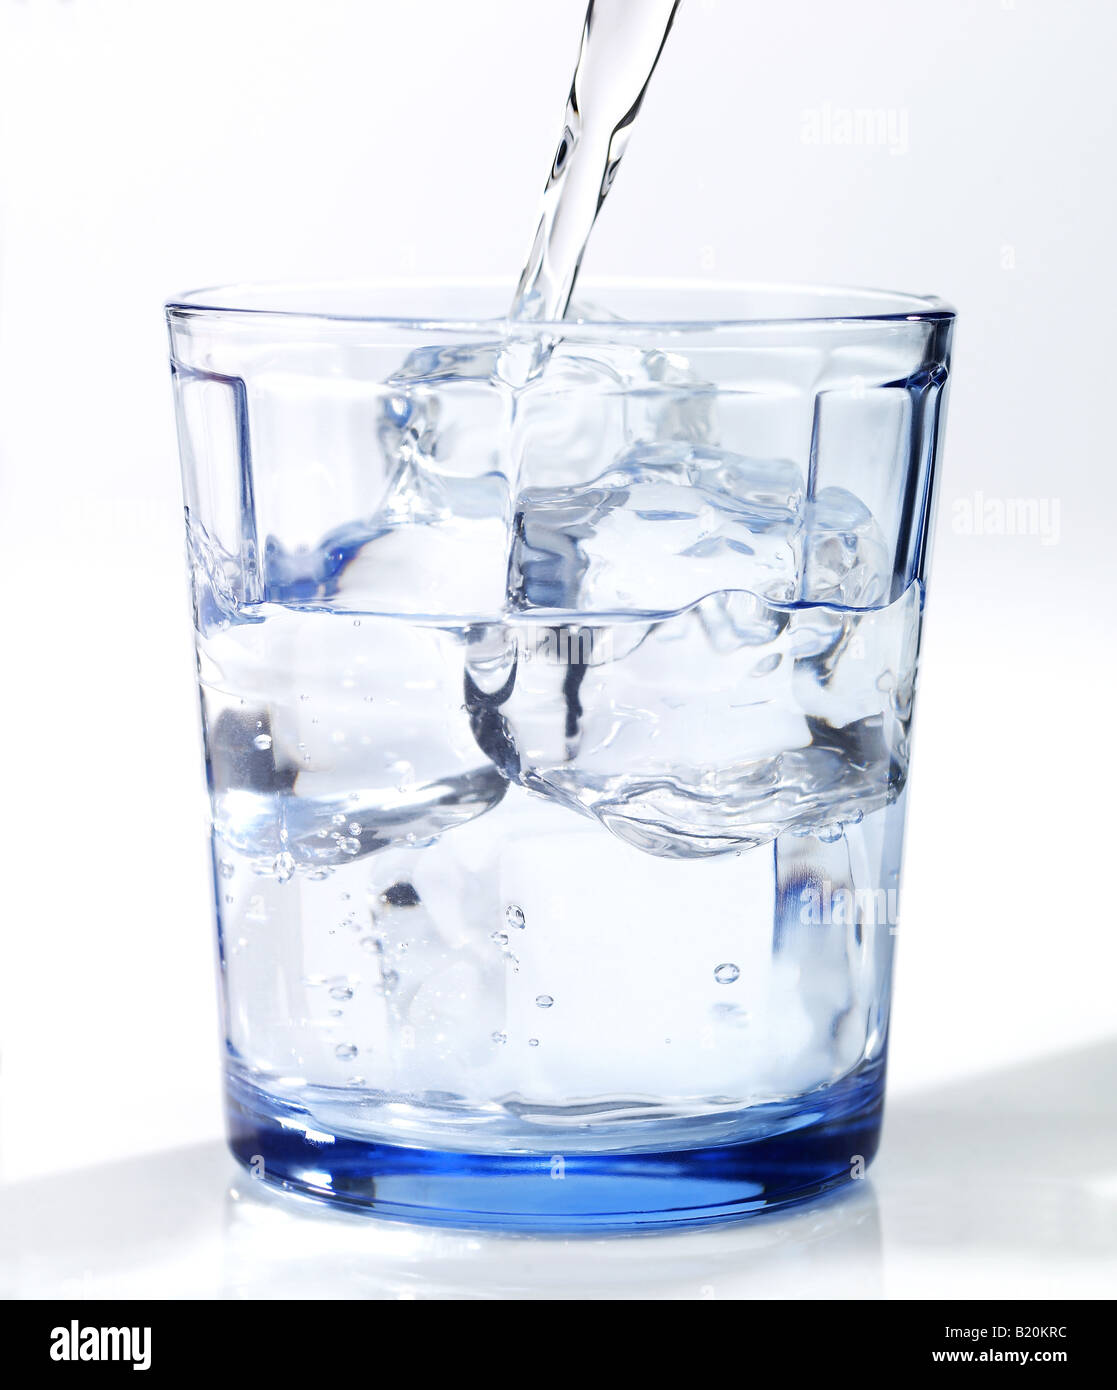 Glass of water being poured Stock Photo